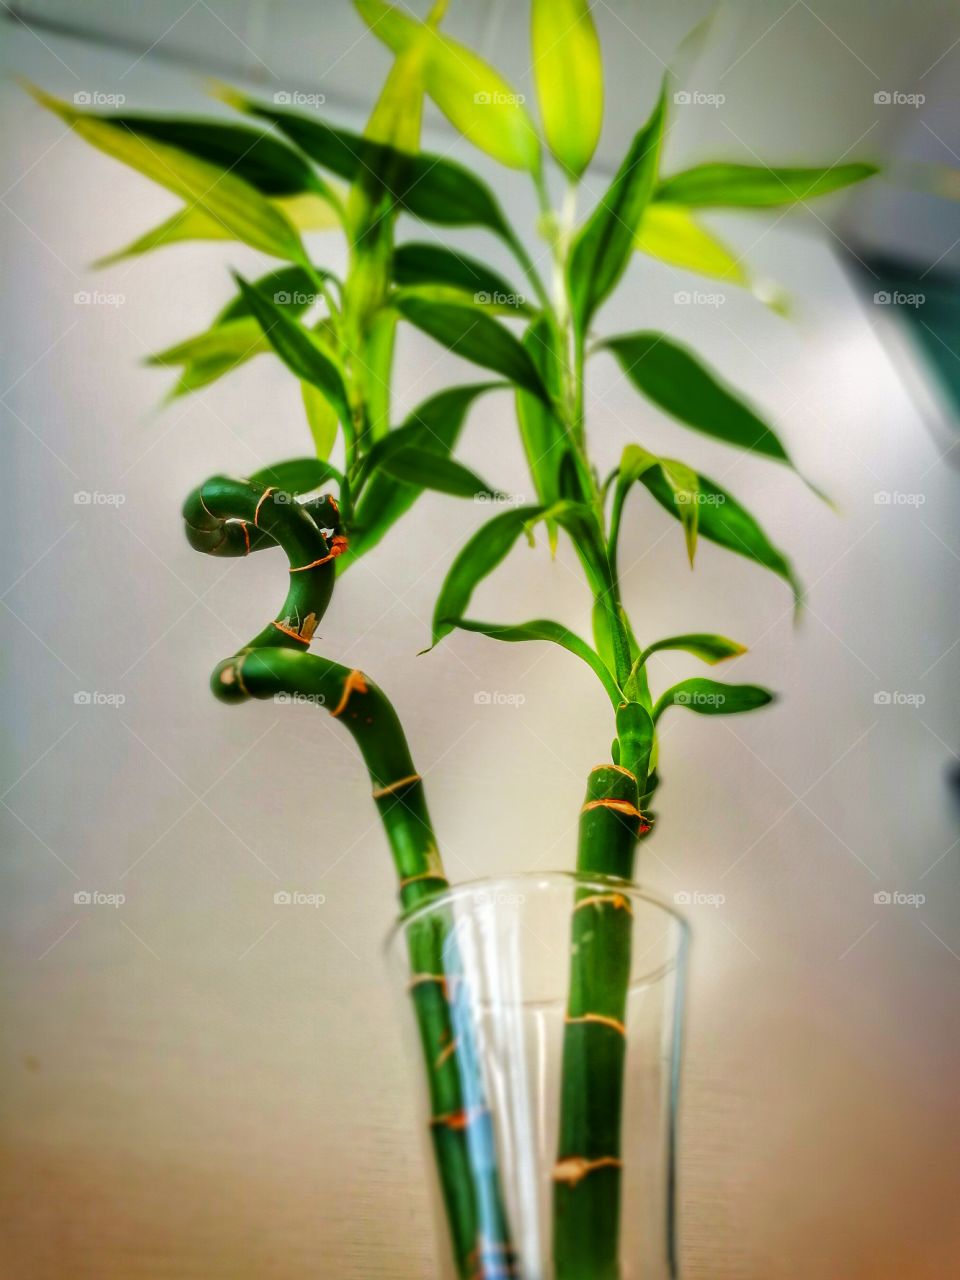 Bamboo plant on glass